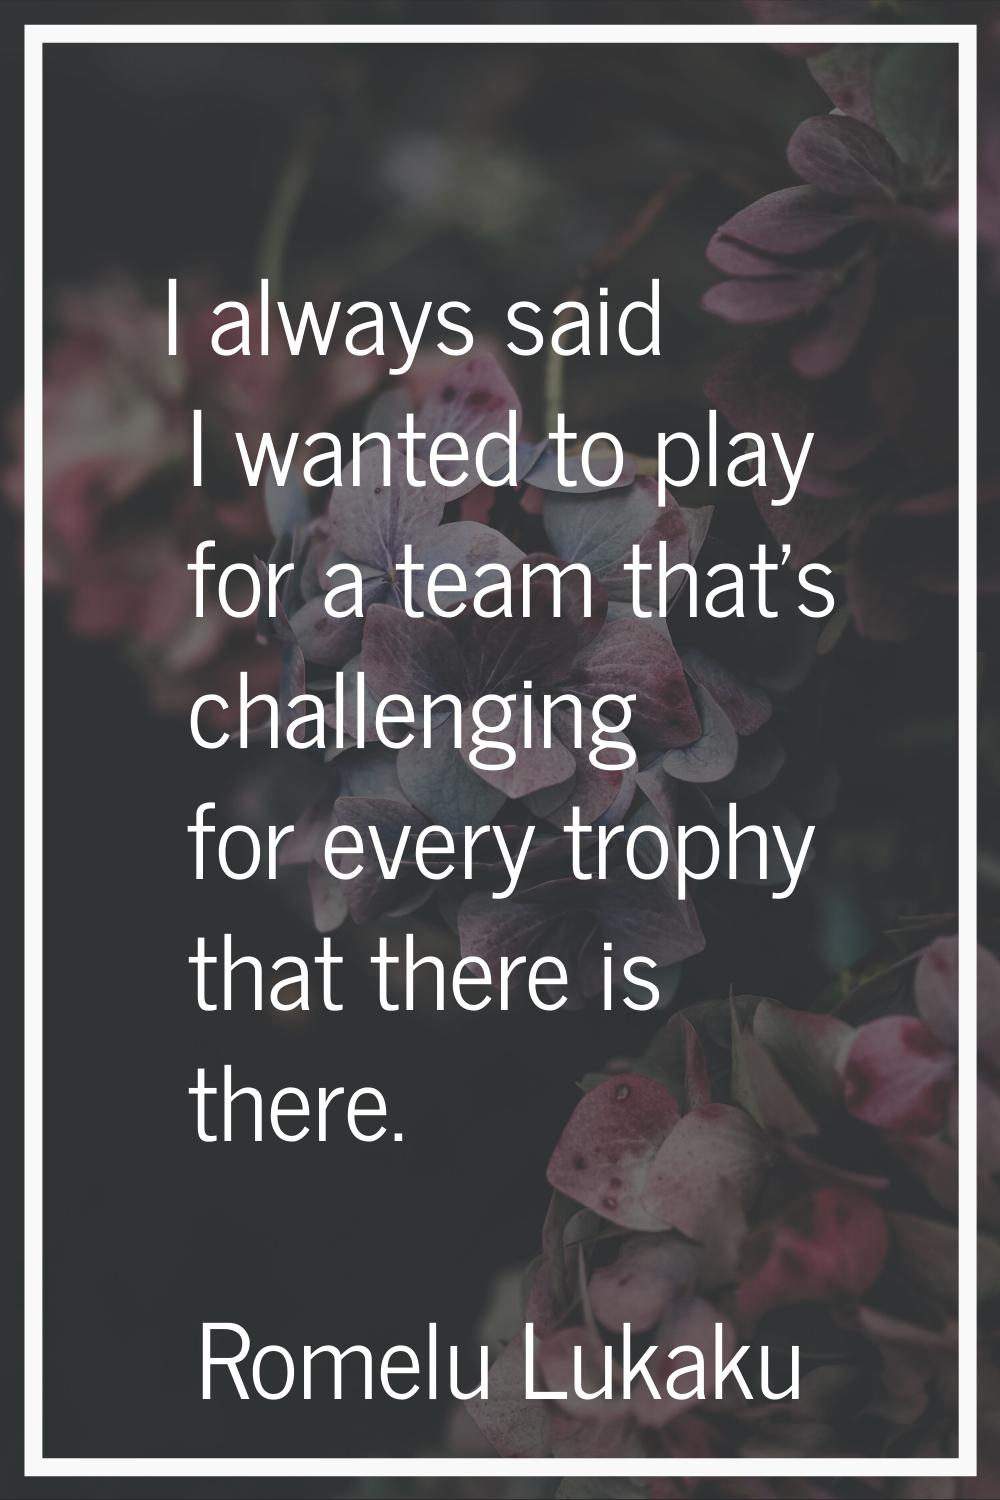 I always said I wanted to play for a team that's challenging for every trophy that there is there.